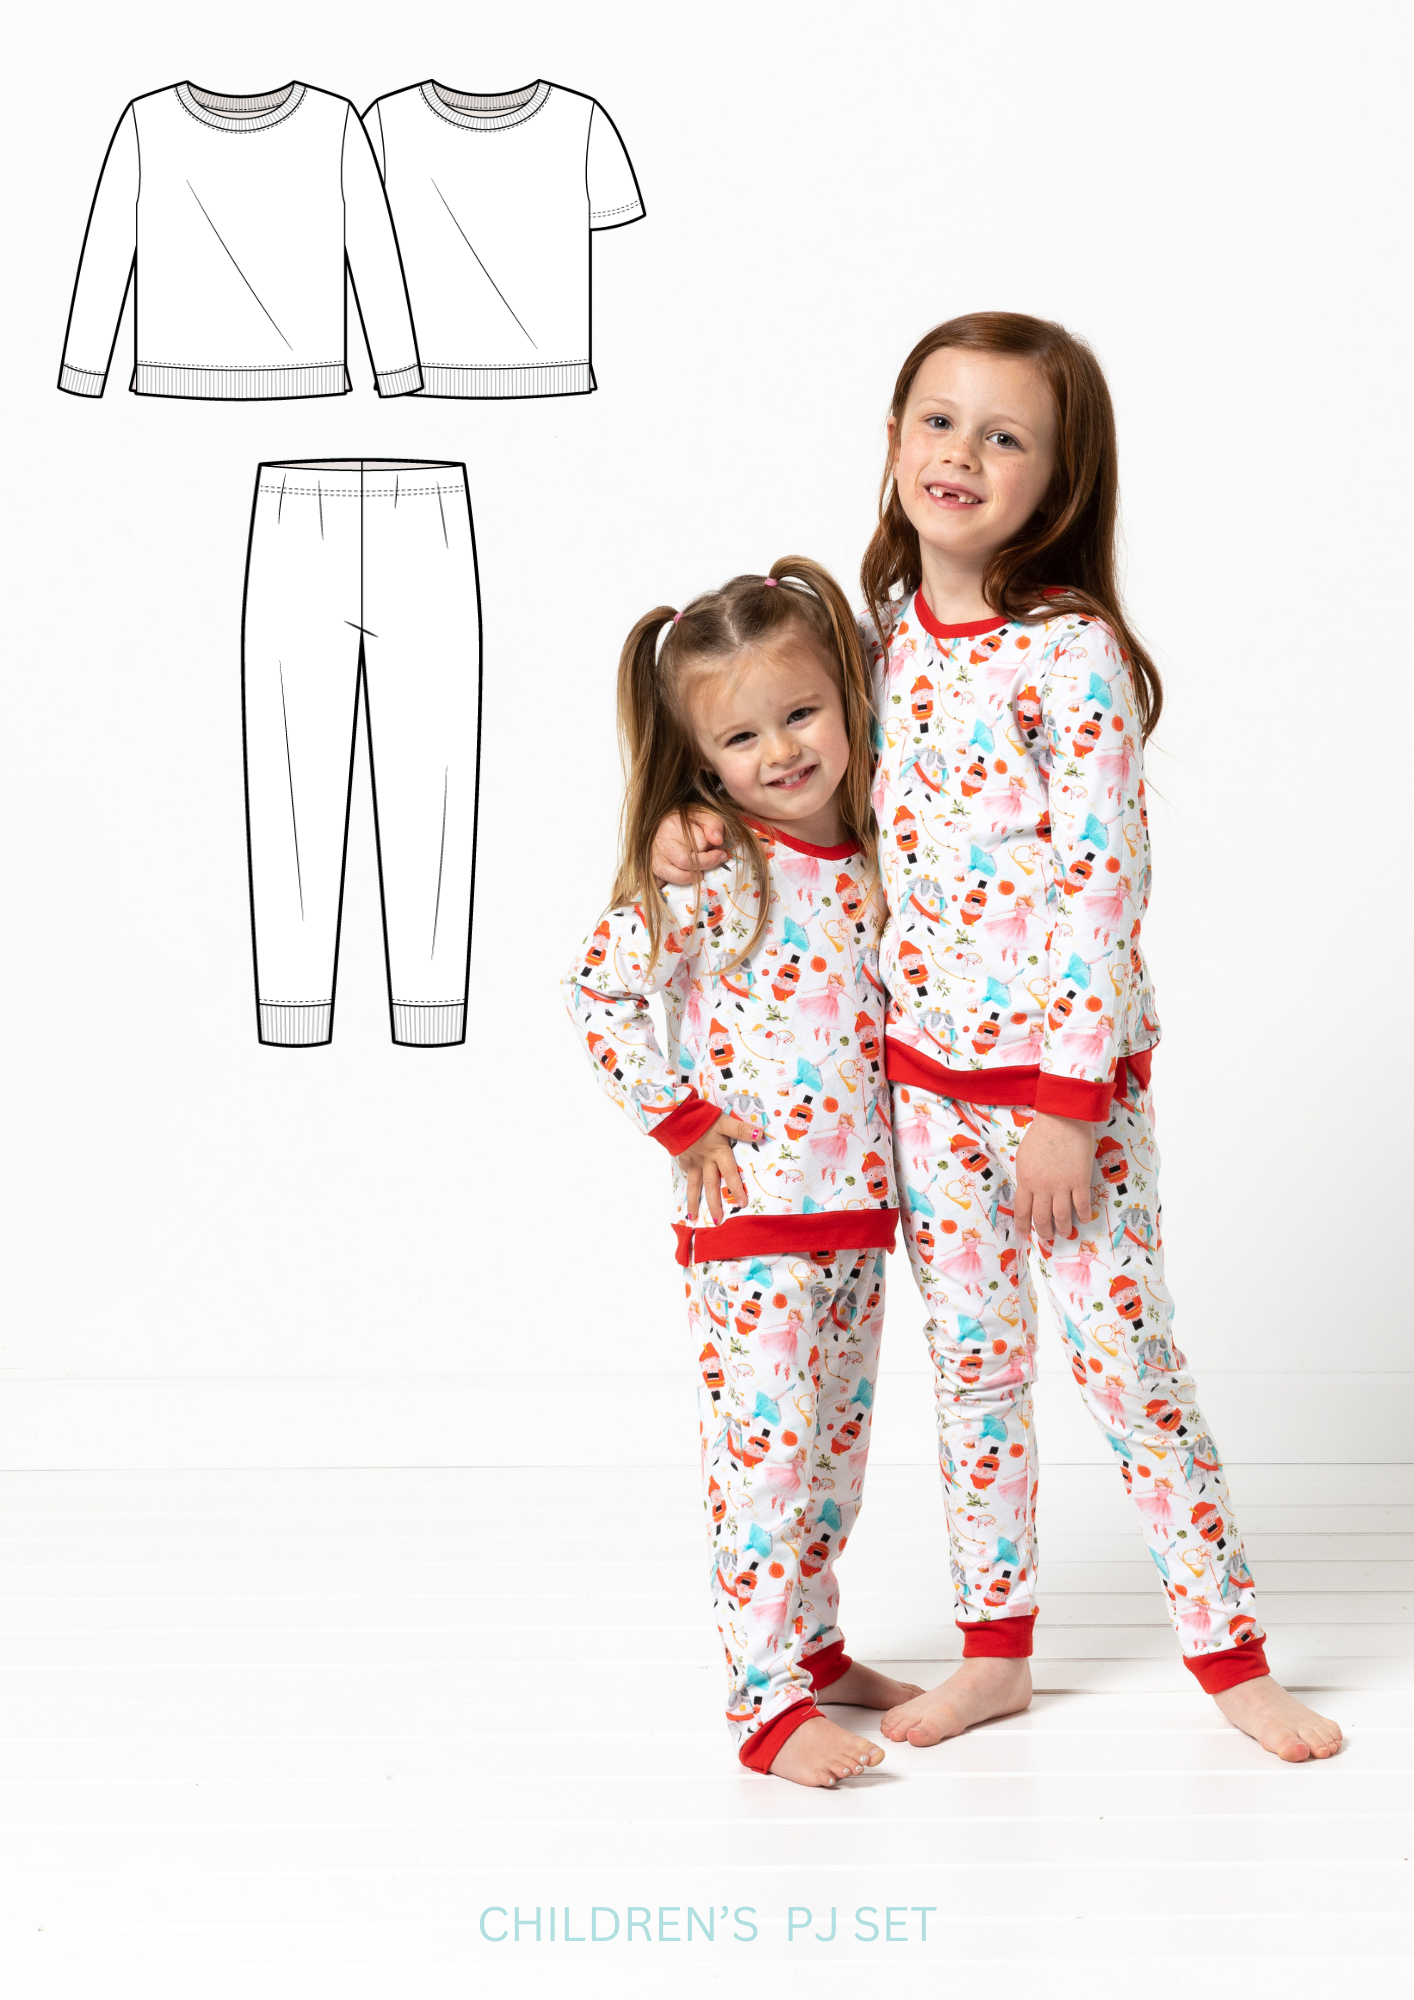 Or choose the Children's PJ Set as your free pattern with any order until November 30!